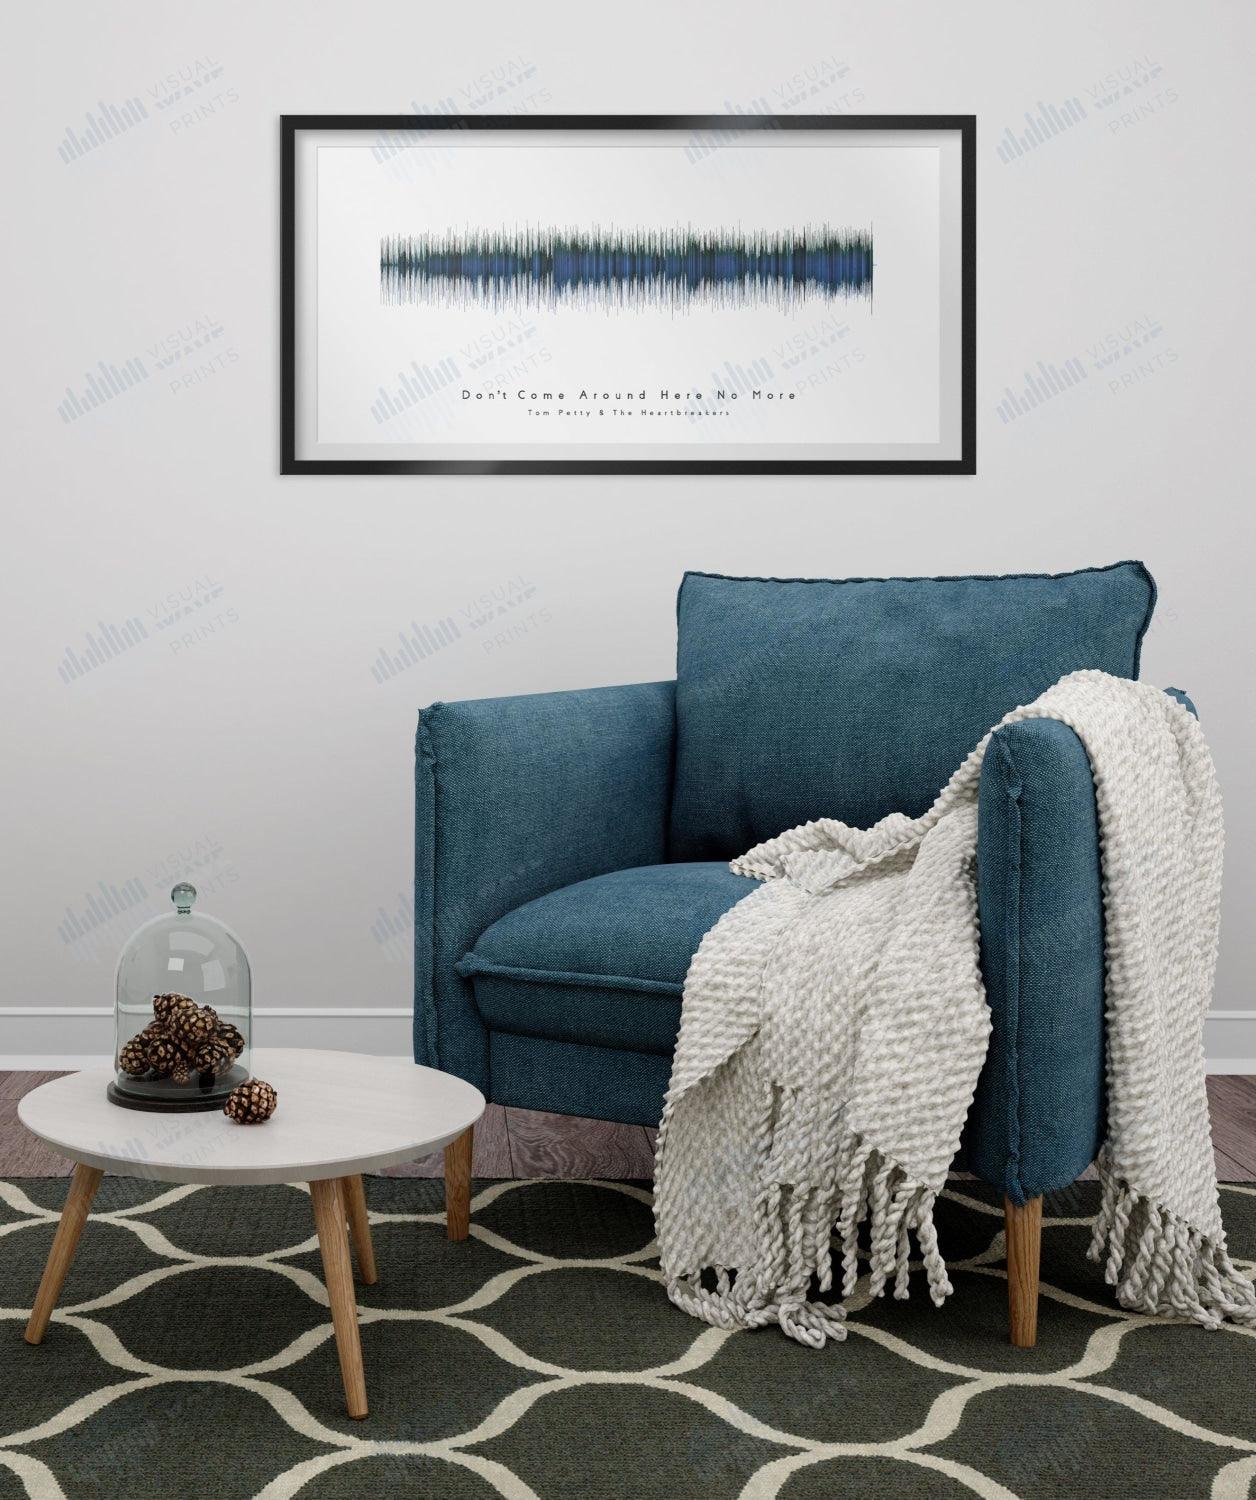 Don't Come Around Here No More by Tom Petty - Visual Wave Prints